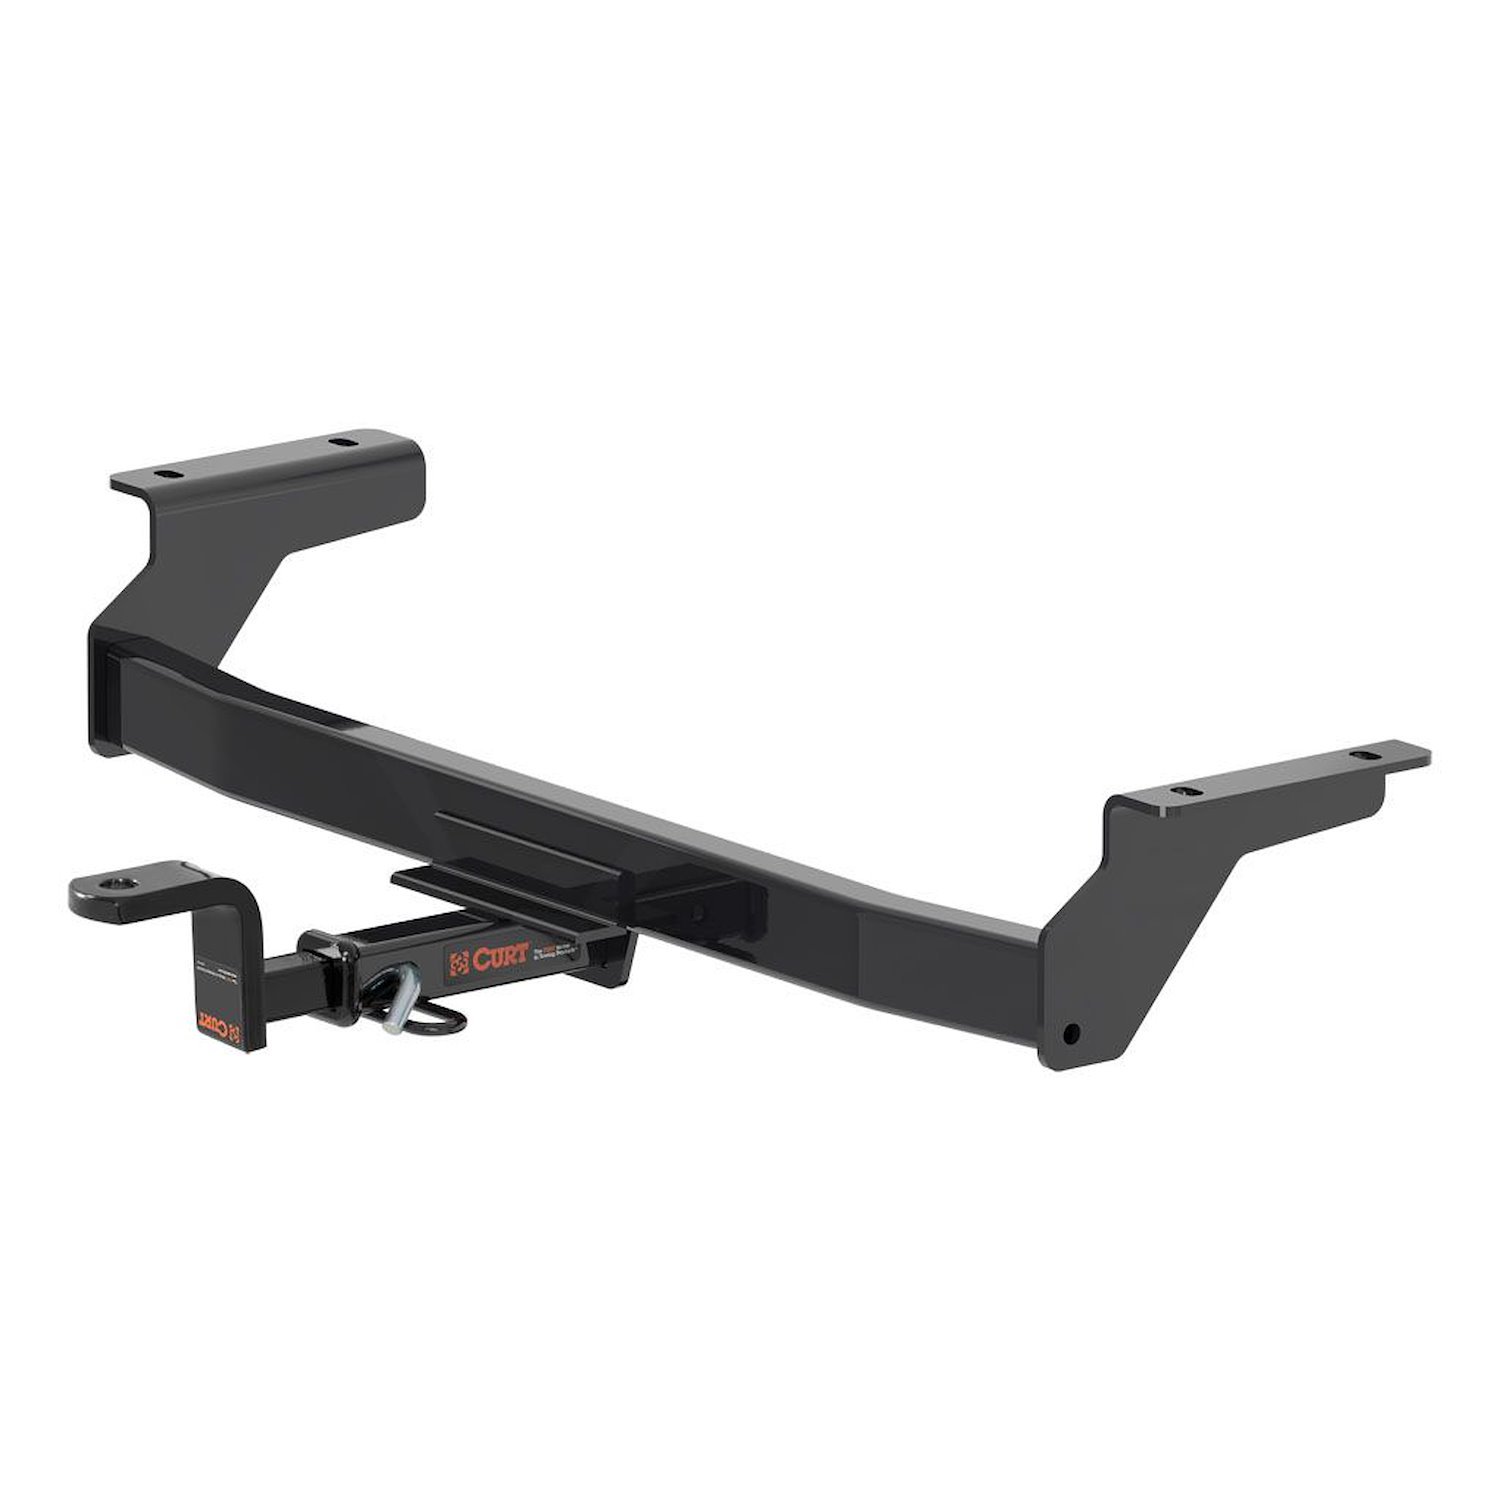 Class 1 Receiver Hitch Kit with 1 1/4